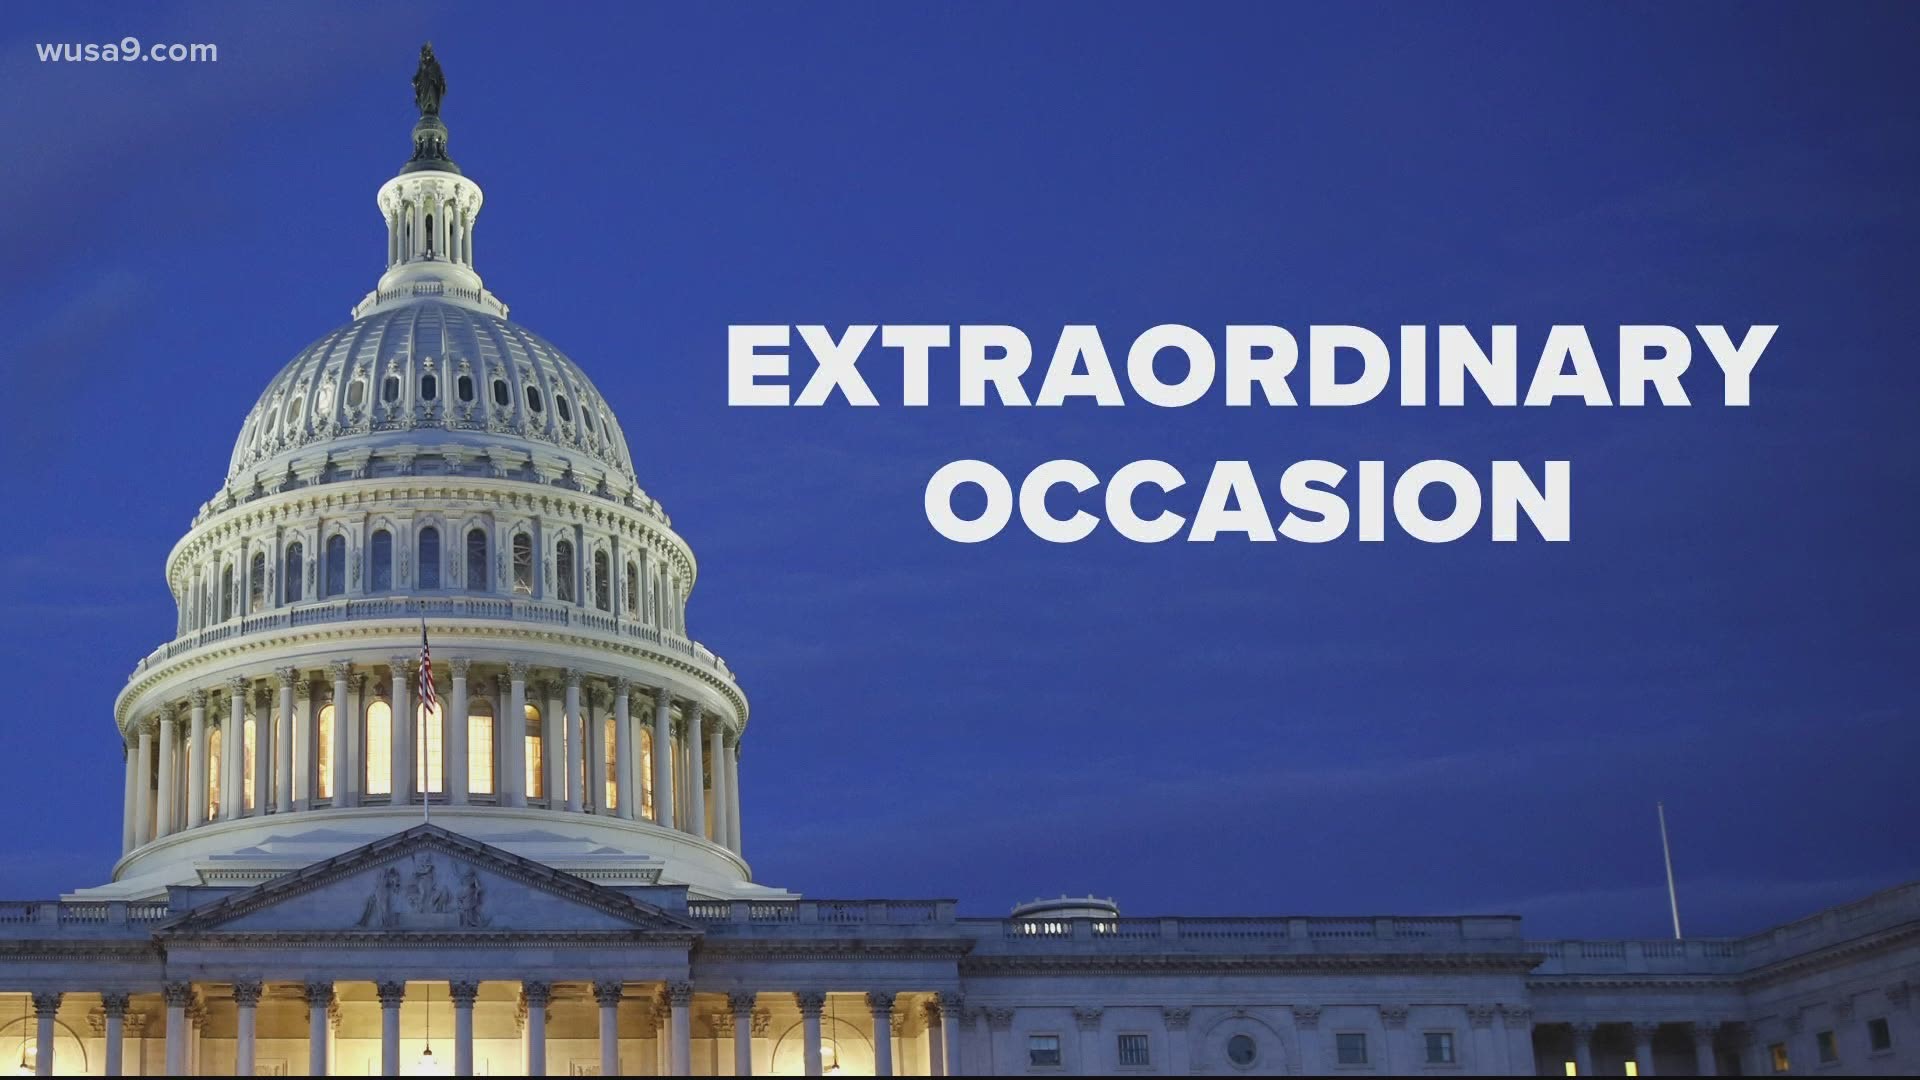 Under Article II Section 3 of the Constitution, the president can convene one or both chambers of Congress "on extraordinary occasions."